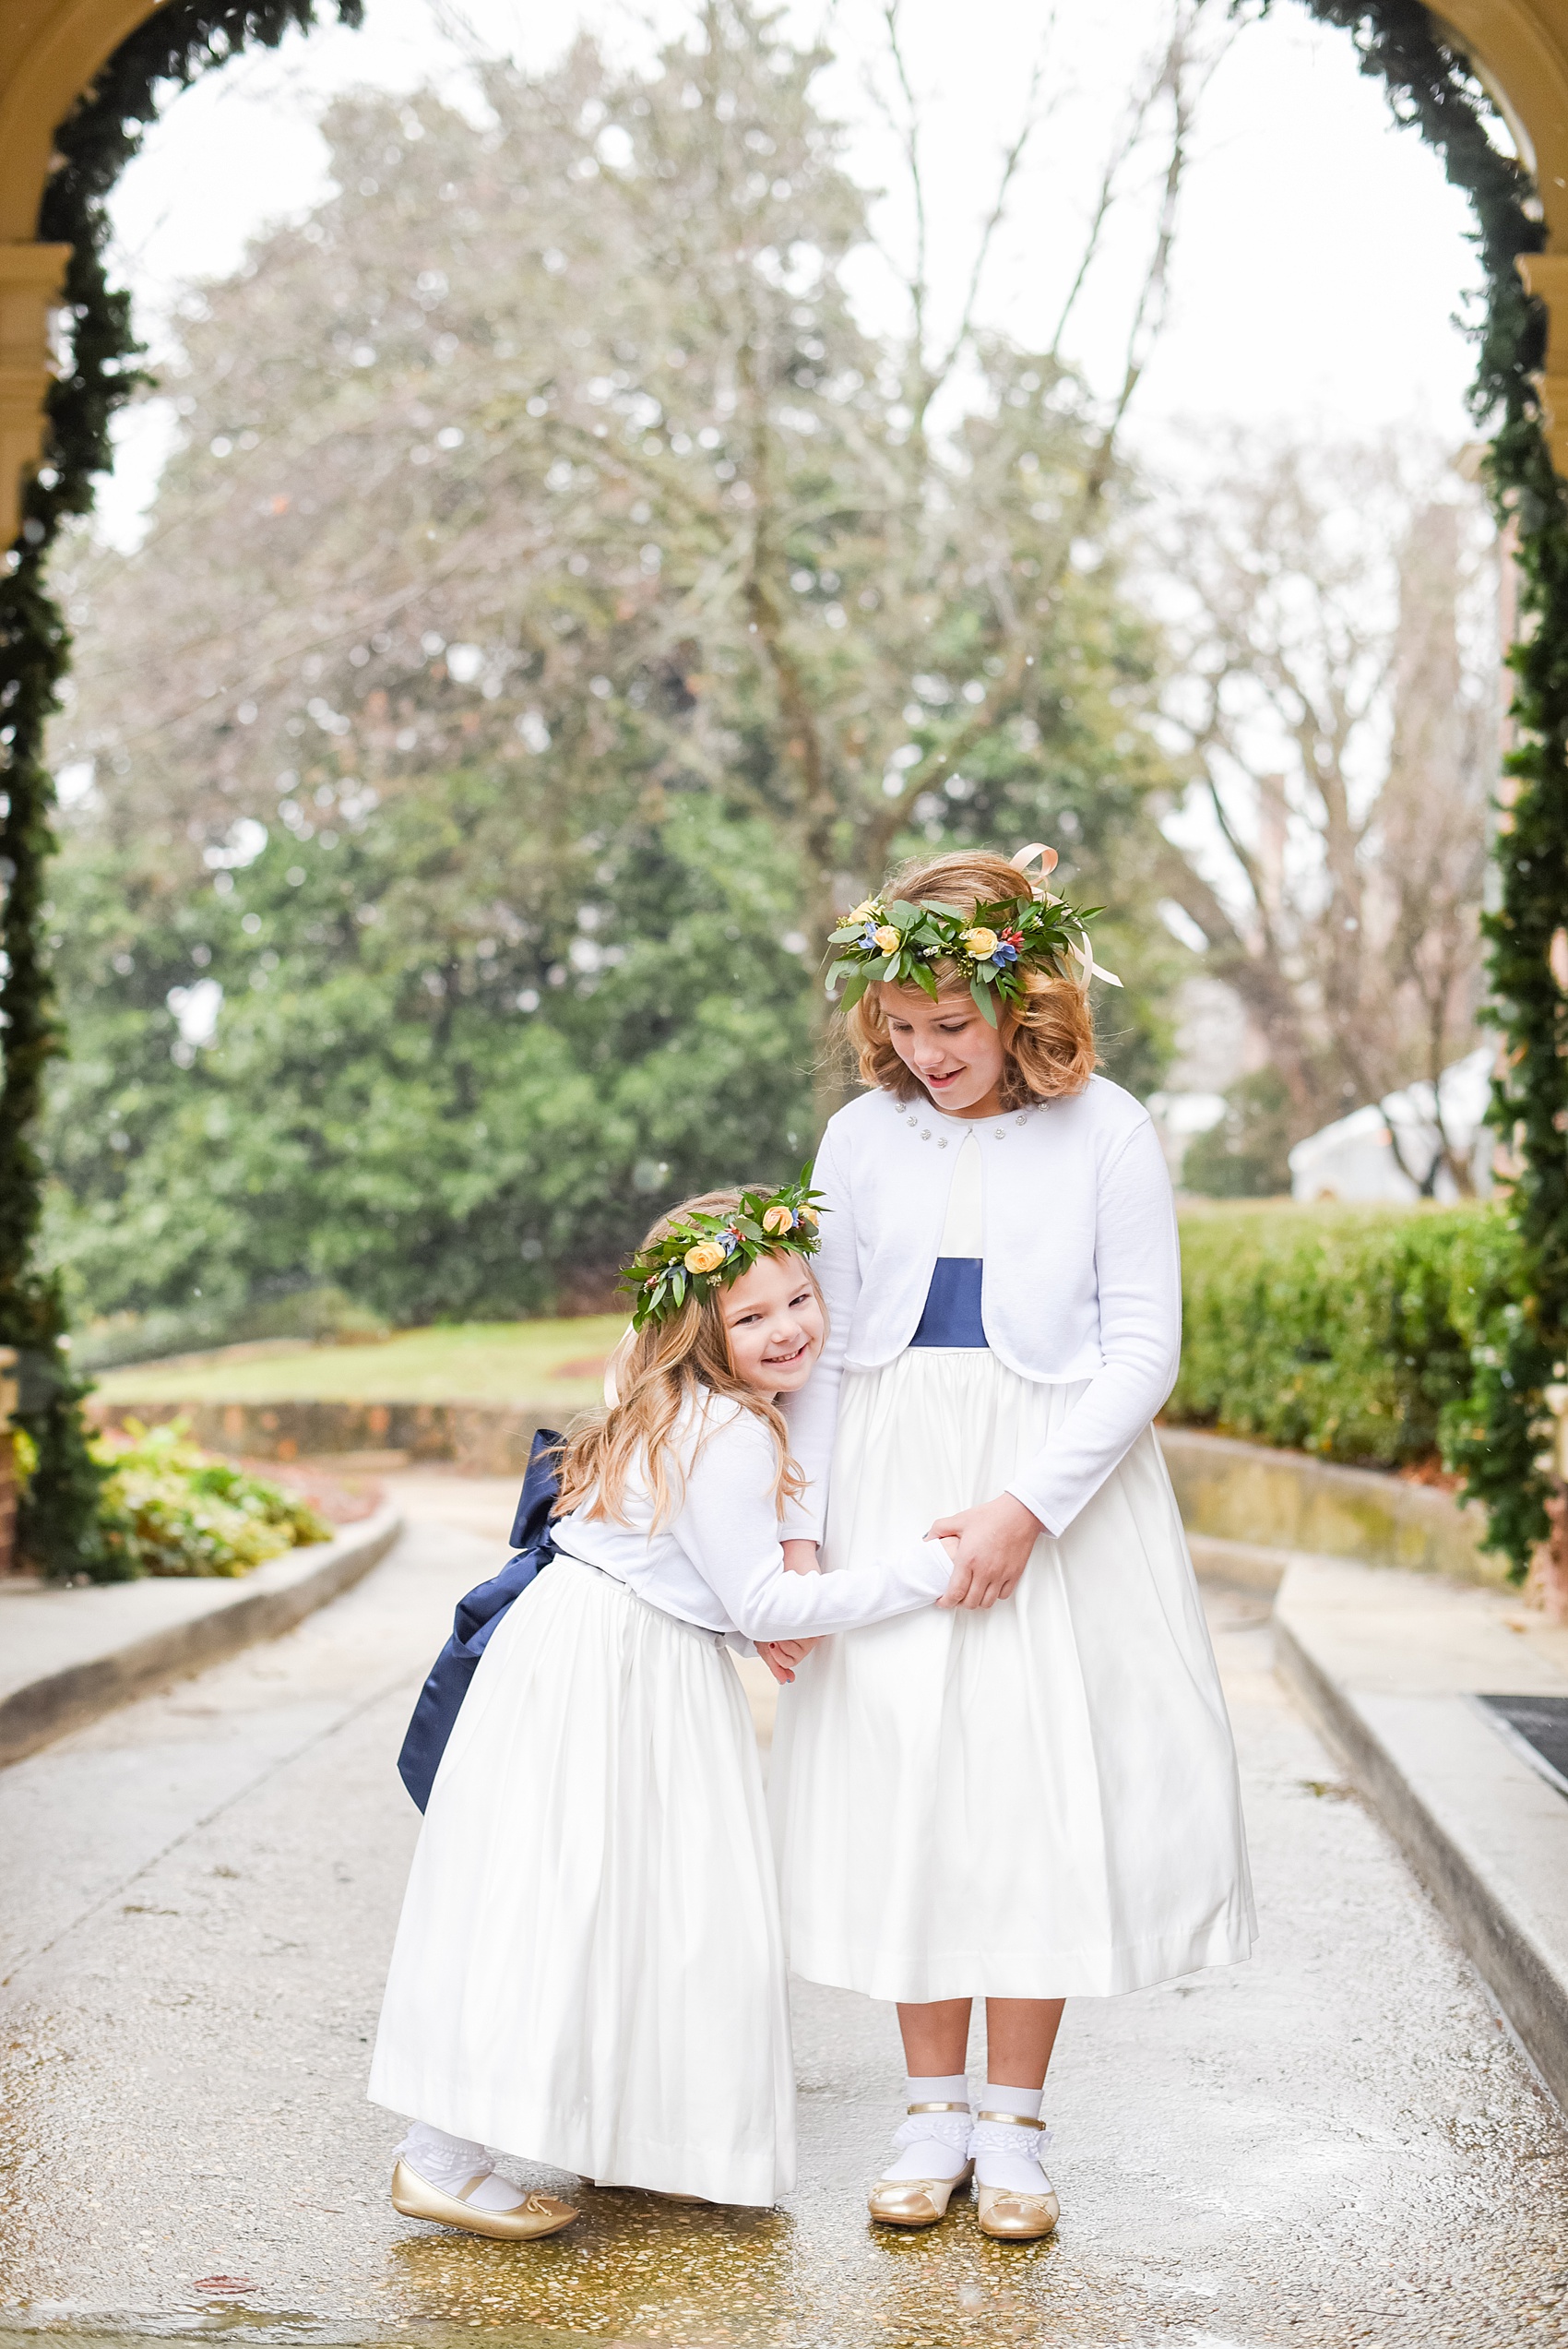 Beautiful wedding photos at The Carolina Inn at Chapel Hill, North Carolina by Mikkel Paige Photography. Photo of the flower girls with navy blue sashes and flower crowns. Click through to see the rest of this gorgeous winter wedding! #thecarolinainn #snowywedding